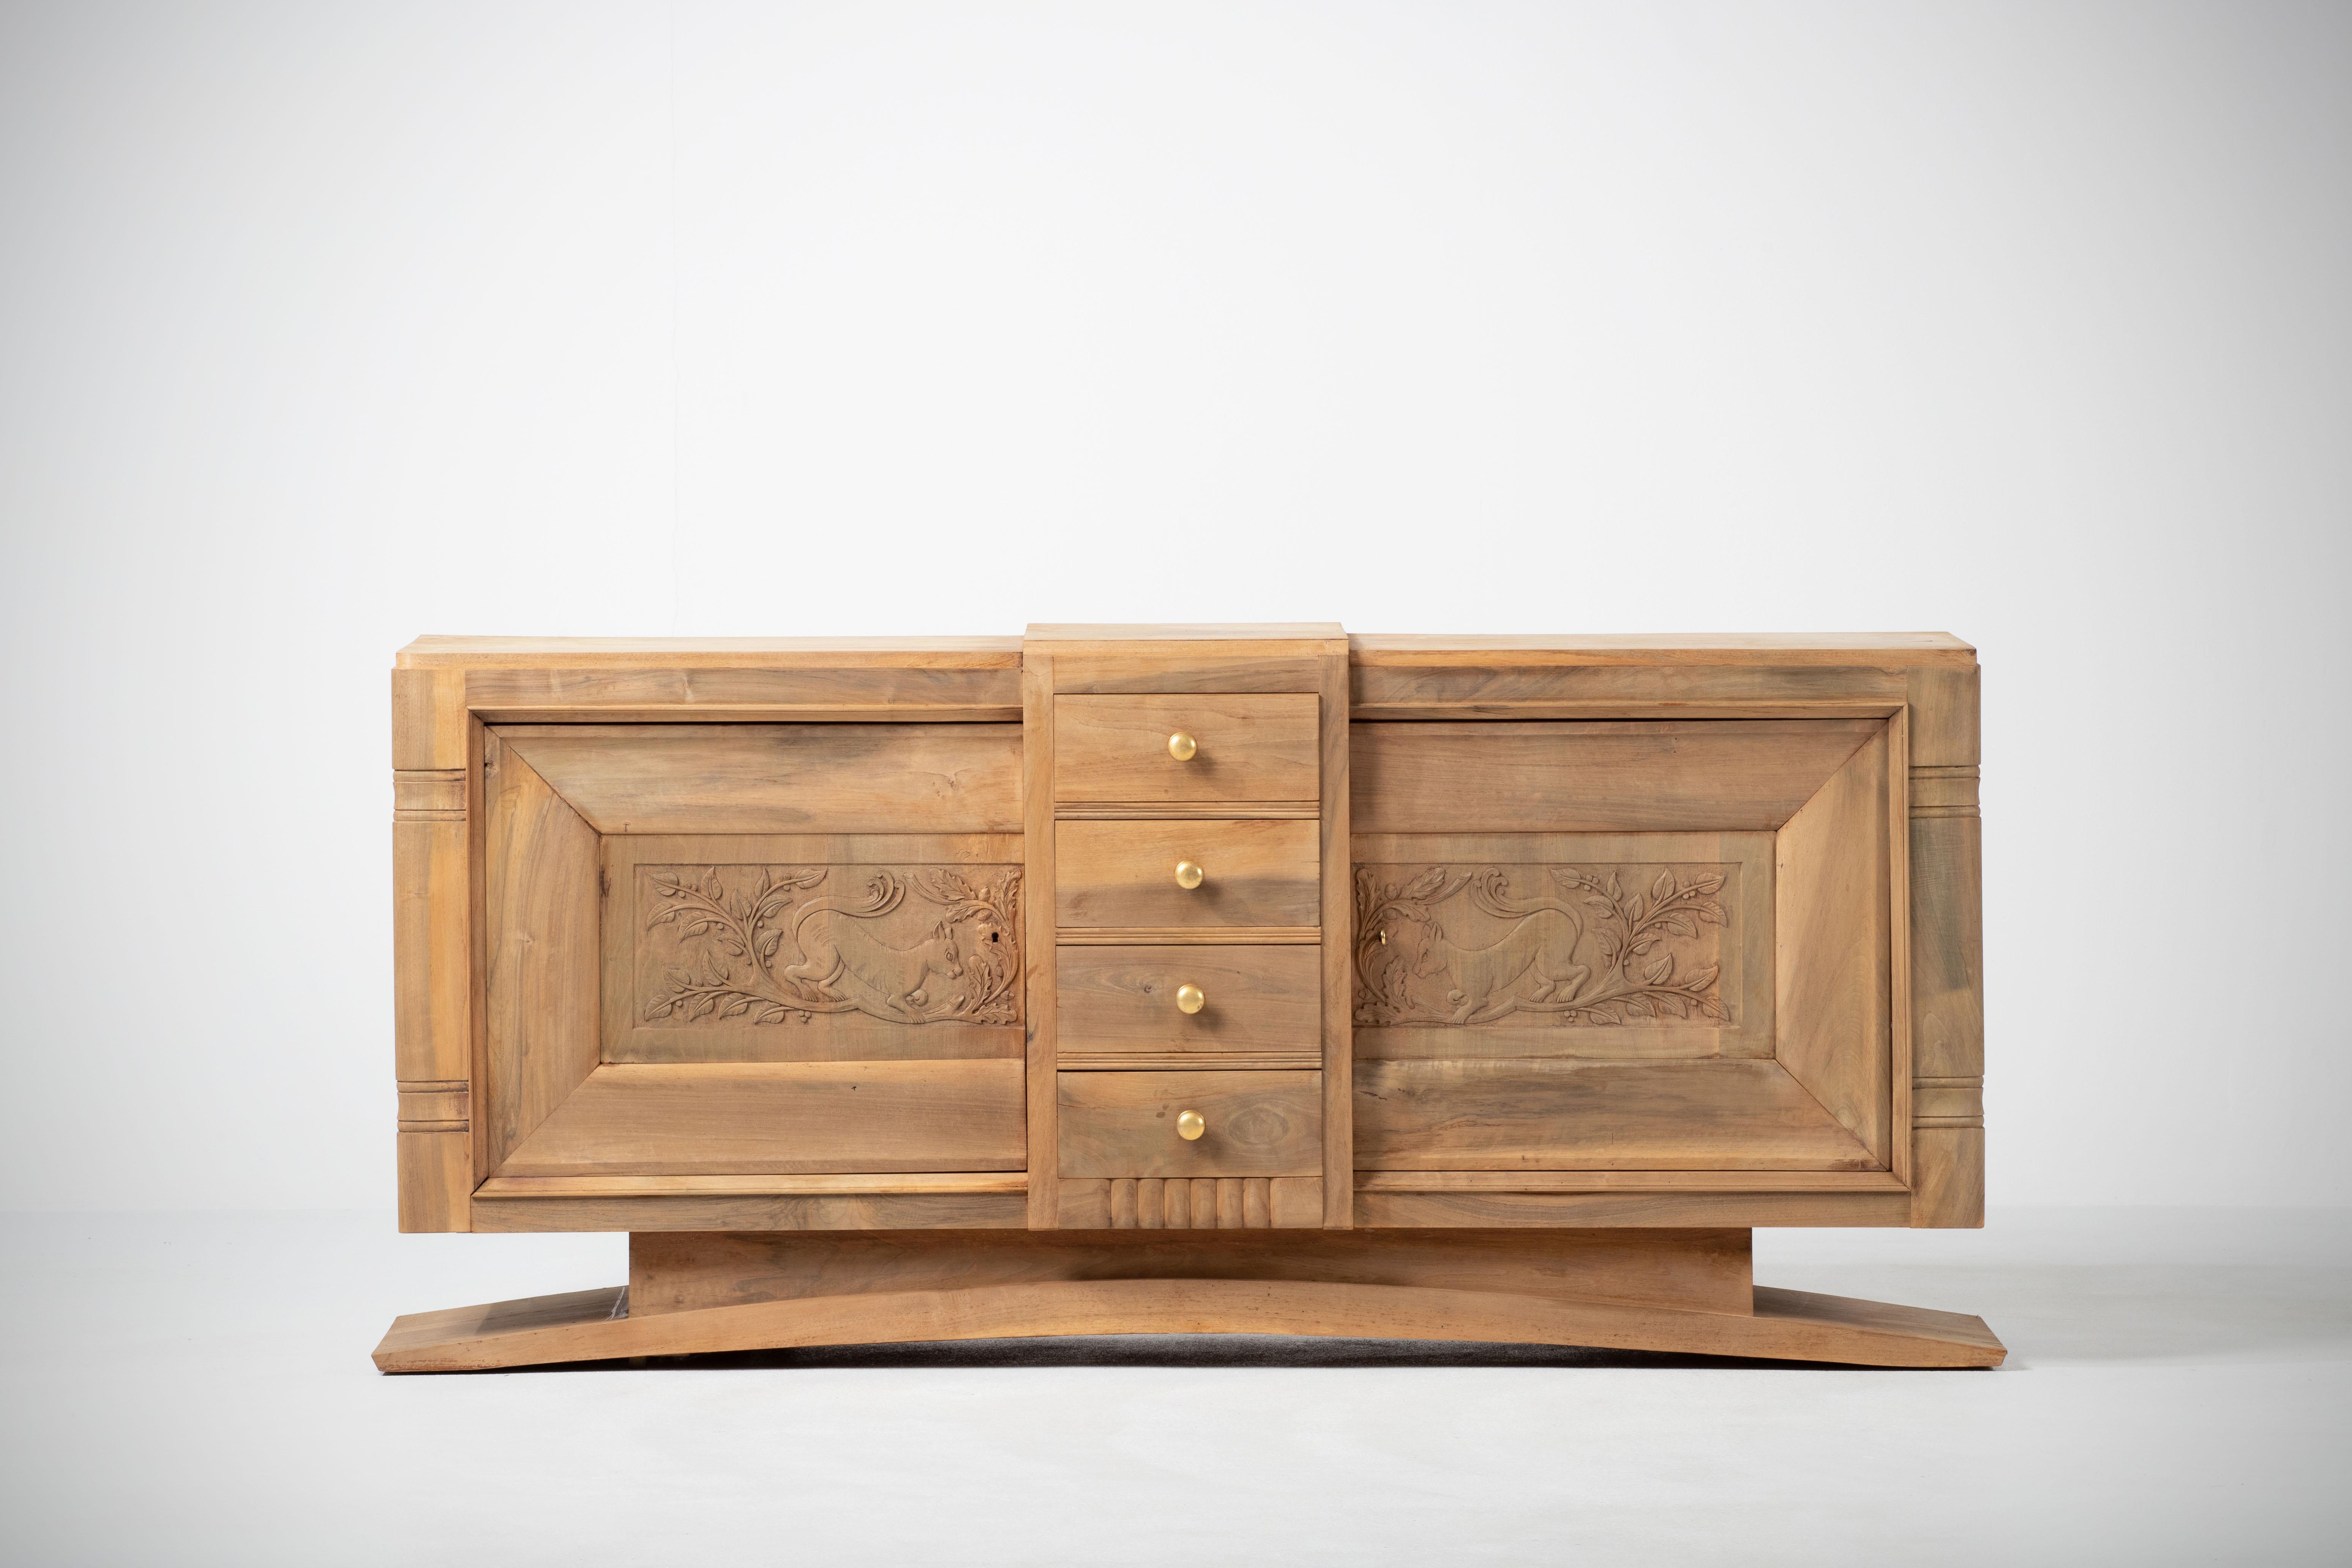 Credenza, solid oak, France, 1940s.
Large Art Deco Brutalist sideboard. 
The credenza consists of two storage facilities covered with very detailed designed door panels, in the center four drawers with brass handles.

